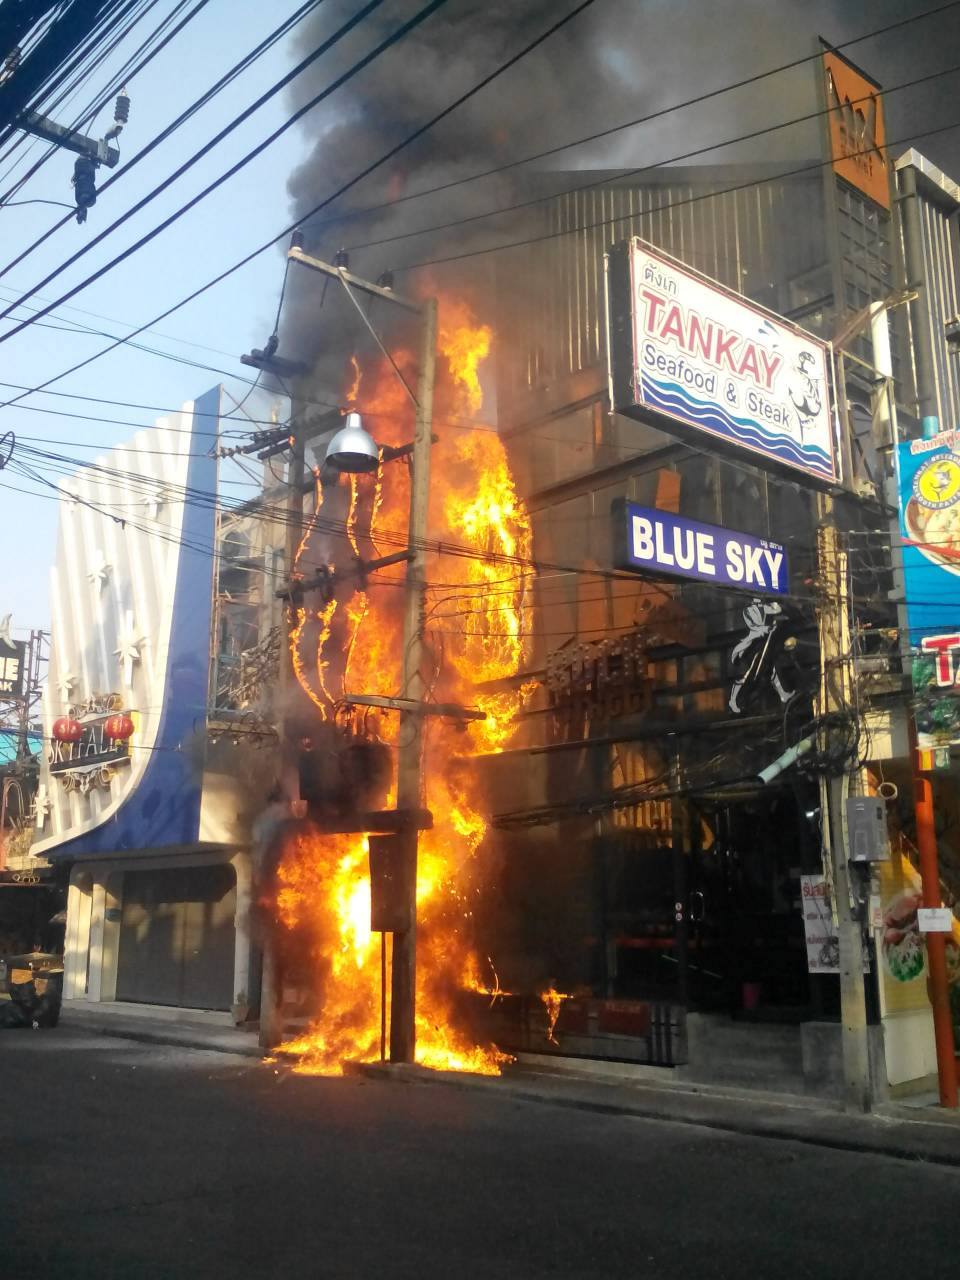 A squirrel sparked an explosion and fire that destroyed the Blue Sky Rock Street bar on Walking Street.